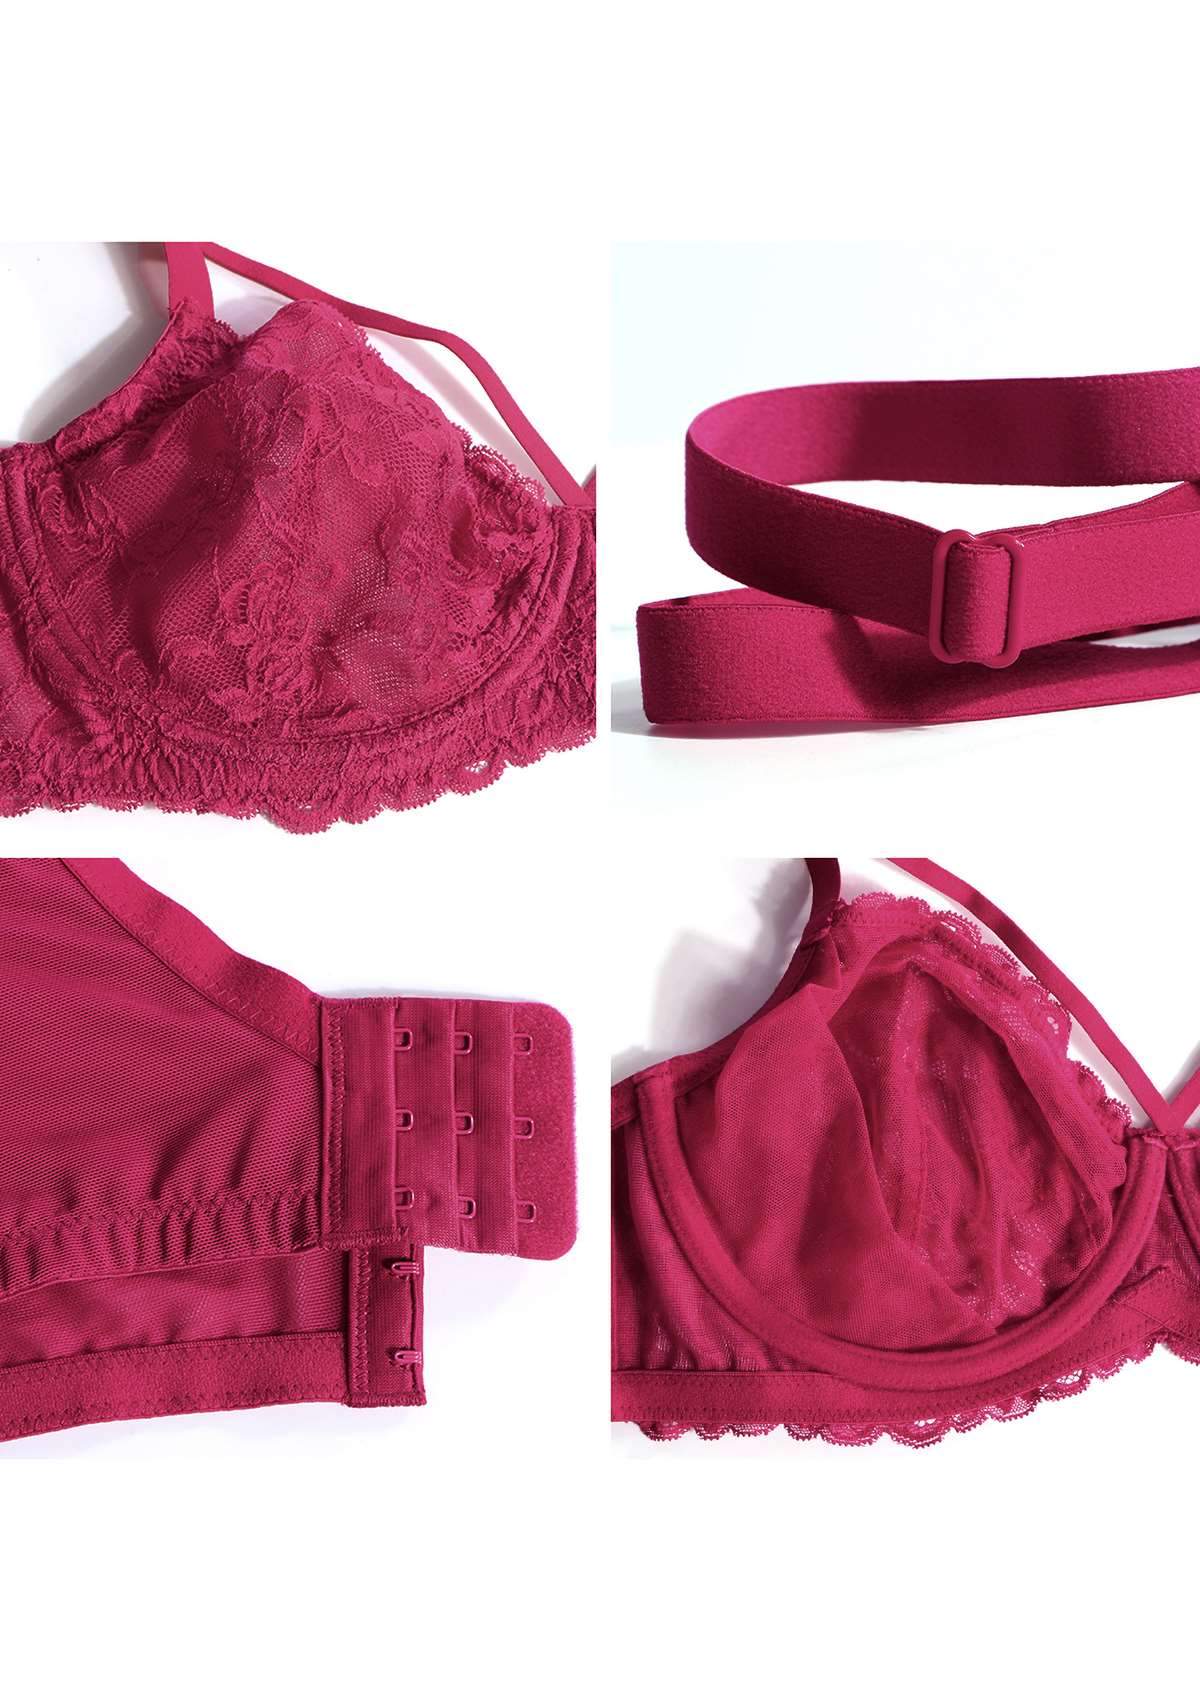 HSIA Pretty In Petals Sexy Lace Bra: Full Coverage Back Smoothing Bra - Red / 40 / DDD/F